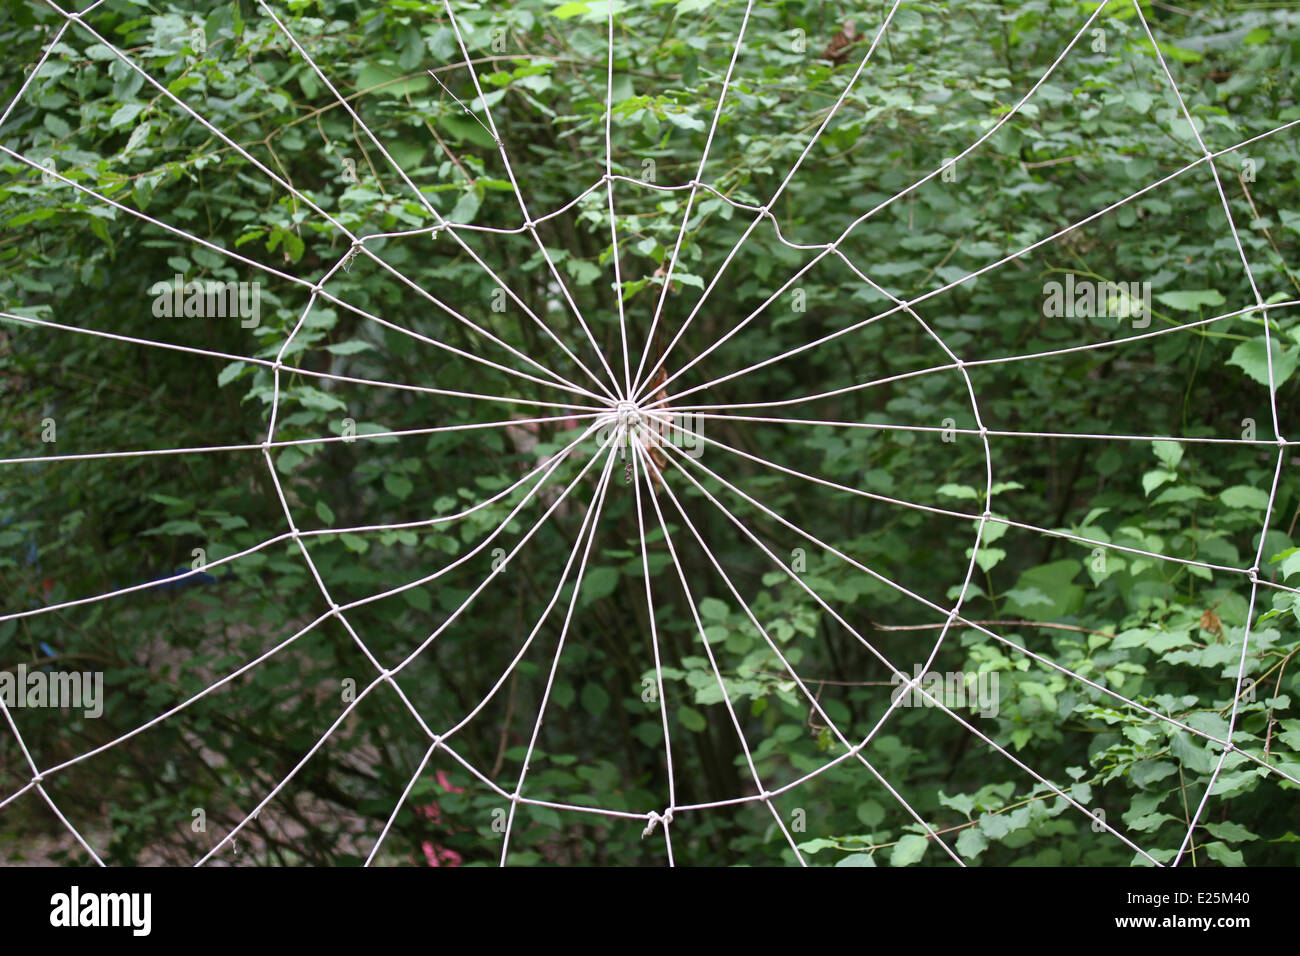 immense spider's Web woven with synthetic yarns in green forest full of trees Stock Photo